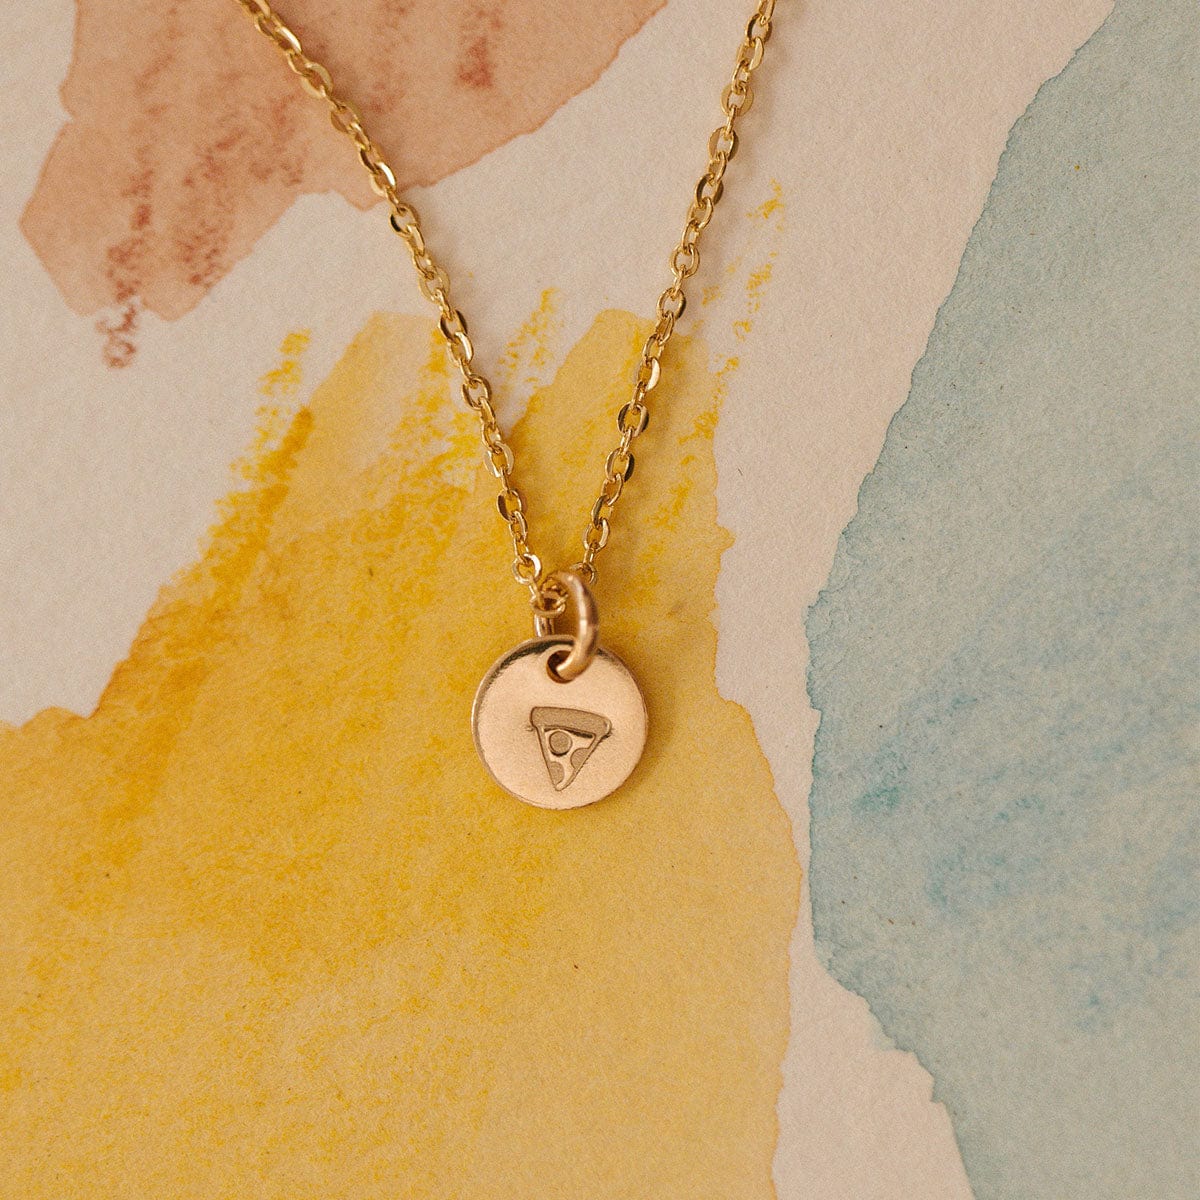 Evie Charm Stacker Necklace | The Little's Collection Necklace